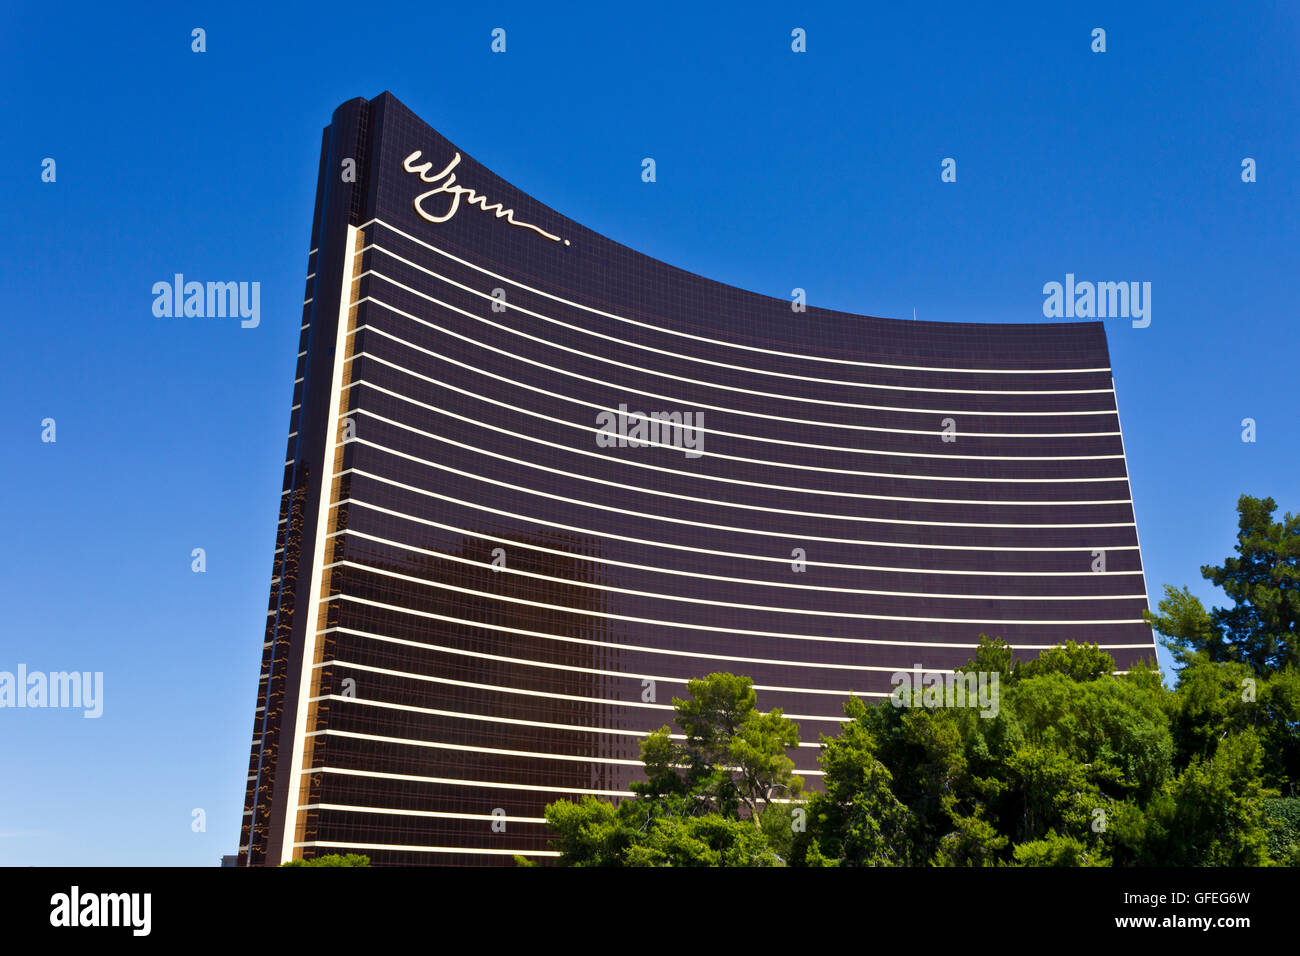 Las Vegas - Circa July 2016: The Wynn Las Vegas on the Strip. This is the flagship property of Wynn Resorts Limited III Stock Photo